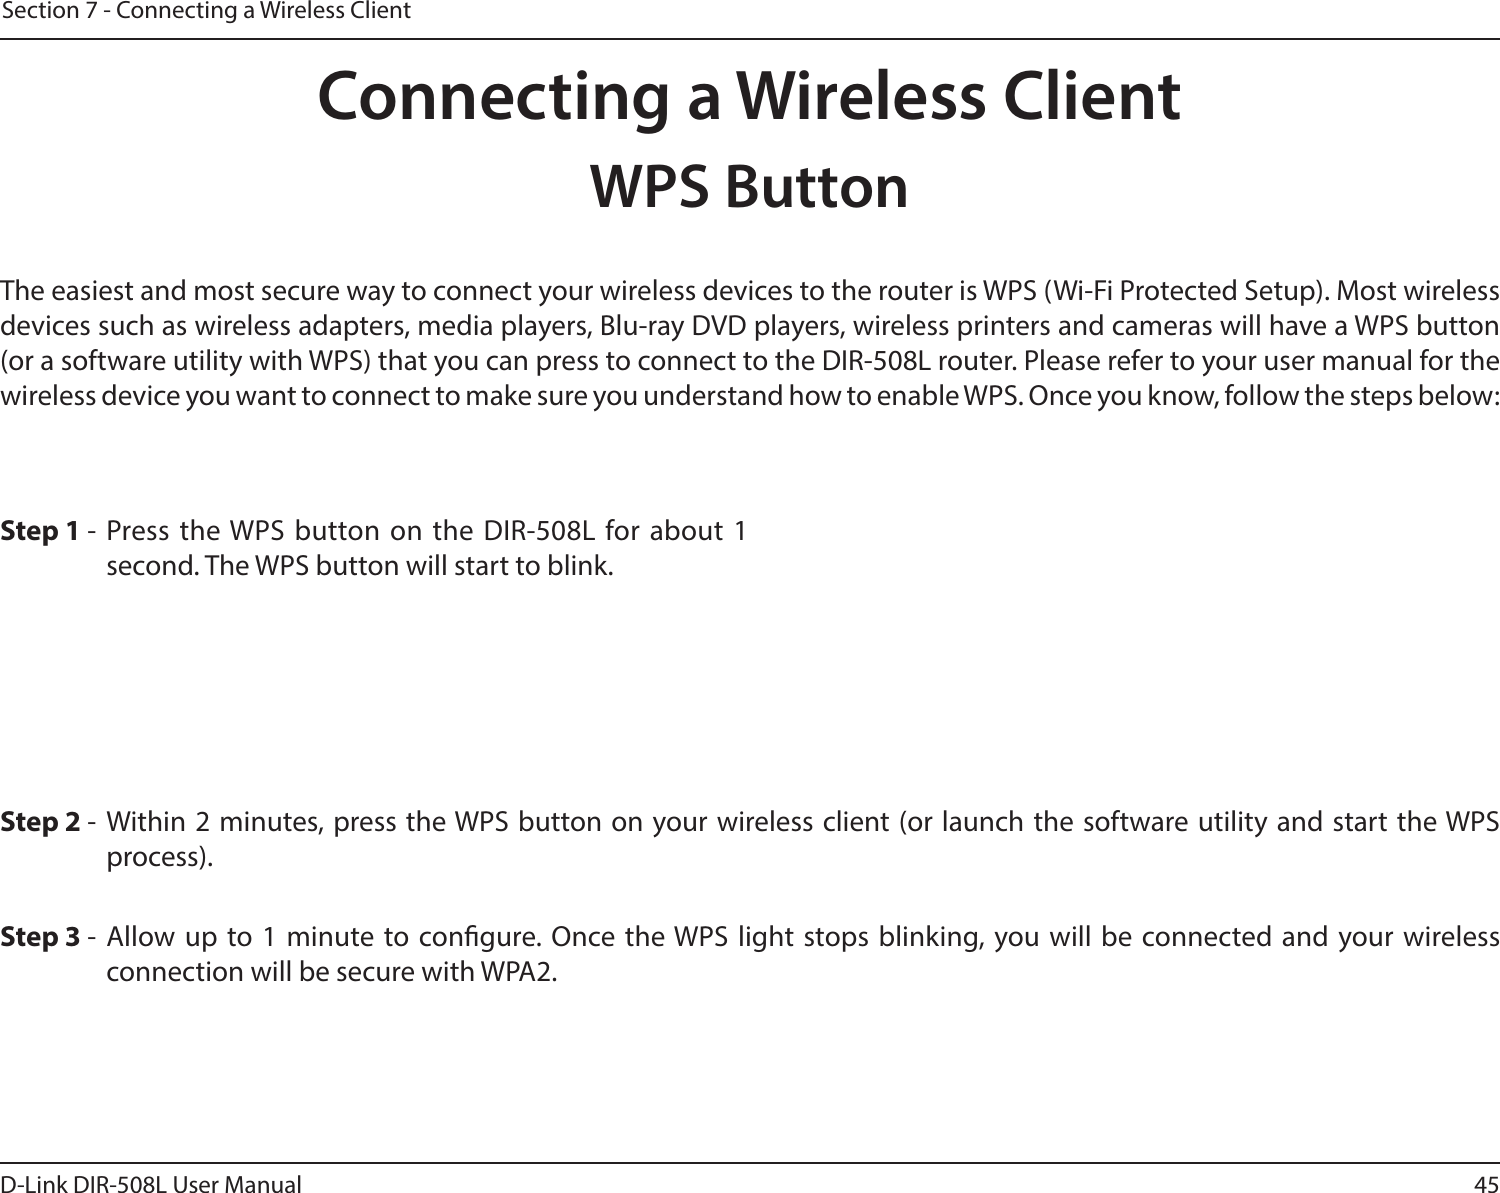 45D-Link DIR-508L User ManualSection 7 - Connecting a Wireless ClientConnecting a Wireless ClientWPS ButtonStep 2 - Within 2 minutes, press the WPS button on your wireless client (or launch the software utility and start the WPS process).The easiest and most secure way to connect your wireless devices to the router is WPS (Wi-Fi Protected Setup). Most wireless devices such as wireless adapters, media players, Blu-ray DVD players, wireless printers and cameras will have a WPS button (or a software utility with WPS) that you can press to connect to the DIR-508L router. Please refer to your user manual for the wireless device you want to connect to make sure you understand how to enable WPS. Once you know, follow the steps below:Step 1 - Press the WPS button on the DIR-508L for about 1 second. The WPS button will start to blink.Step 3 - Allow up to 1 minute to congure. Once the WPS light stops blinking, you will be connected and your wireless connection will be secure with WPA2.